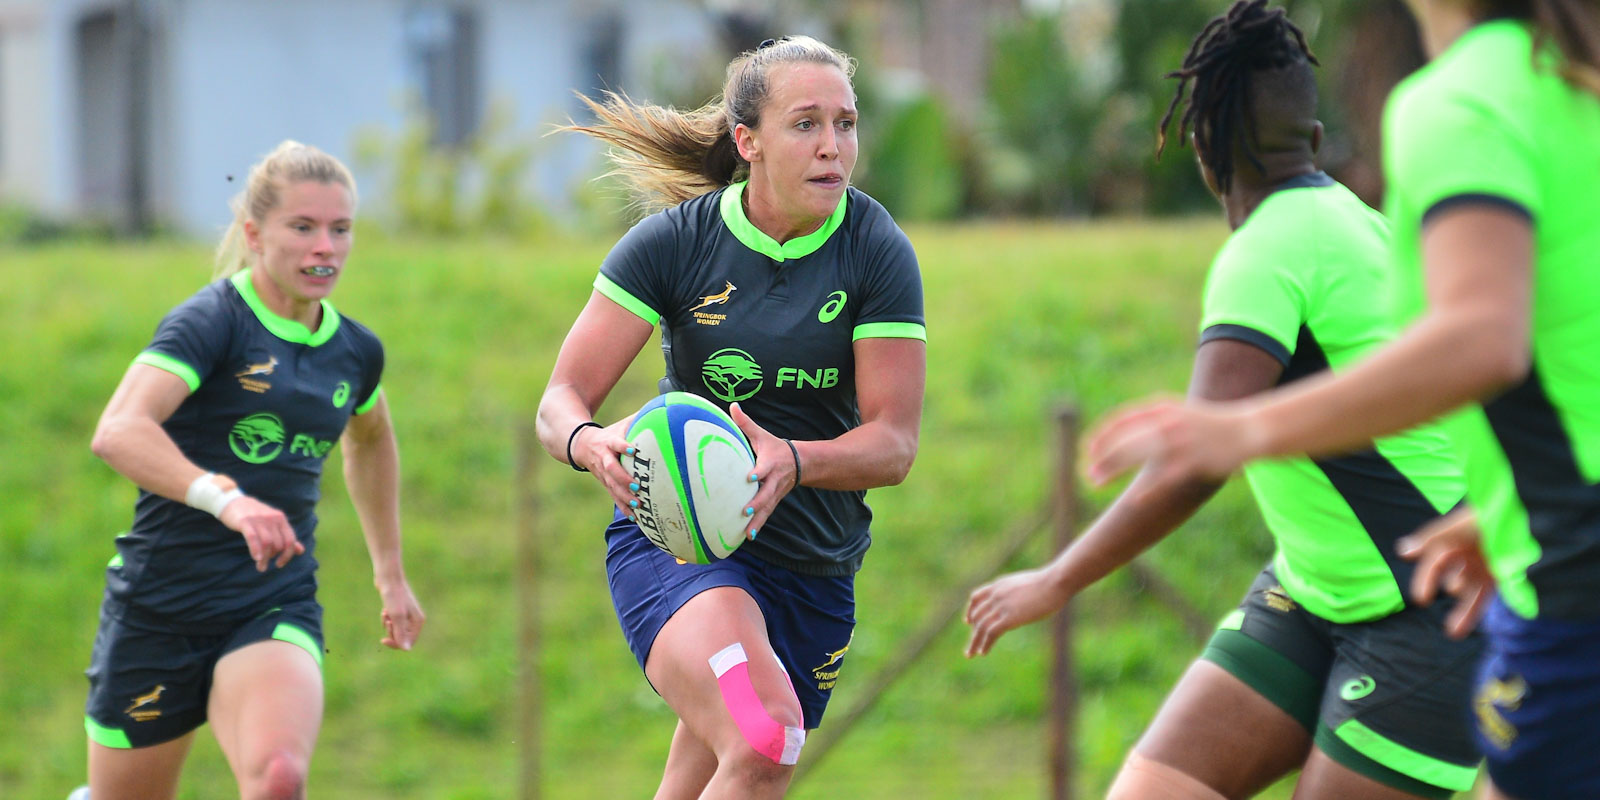 Libbie Janse van Rensburg at training, with Nadine Roos in support.